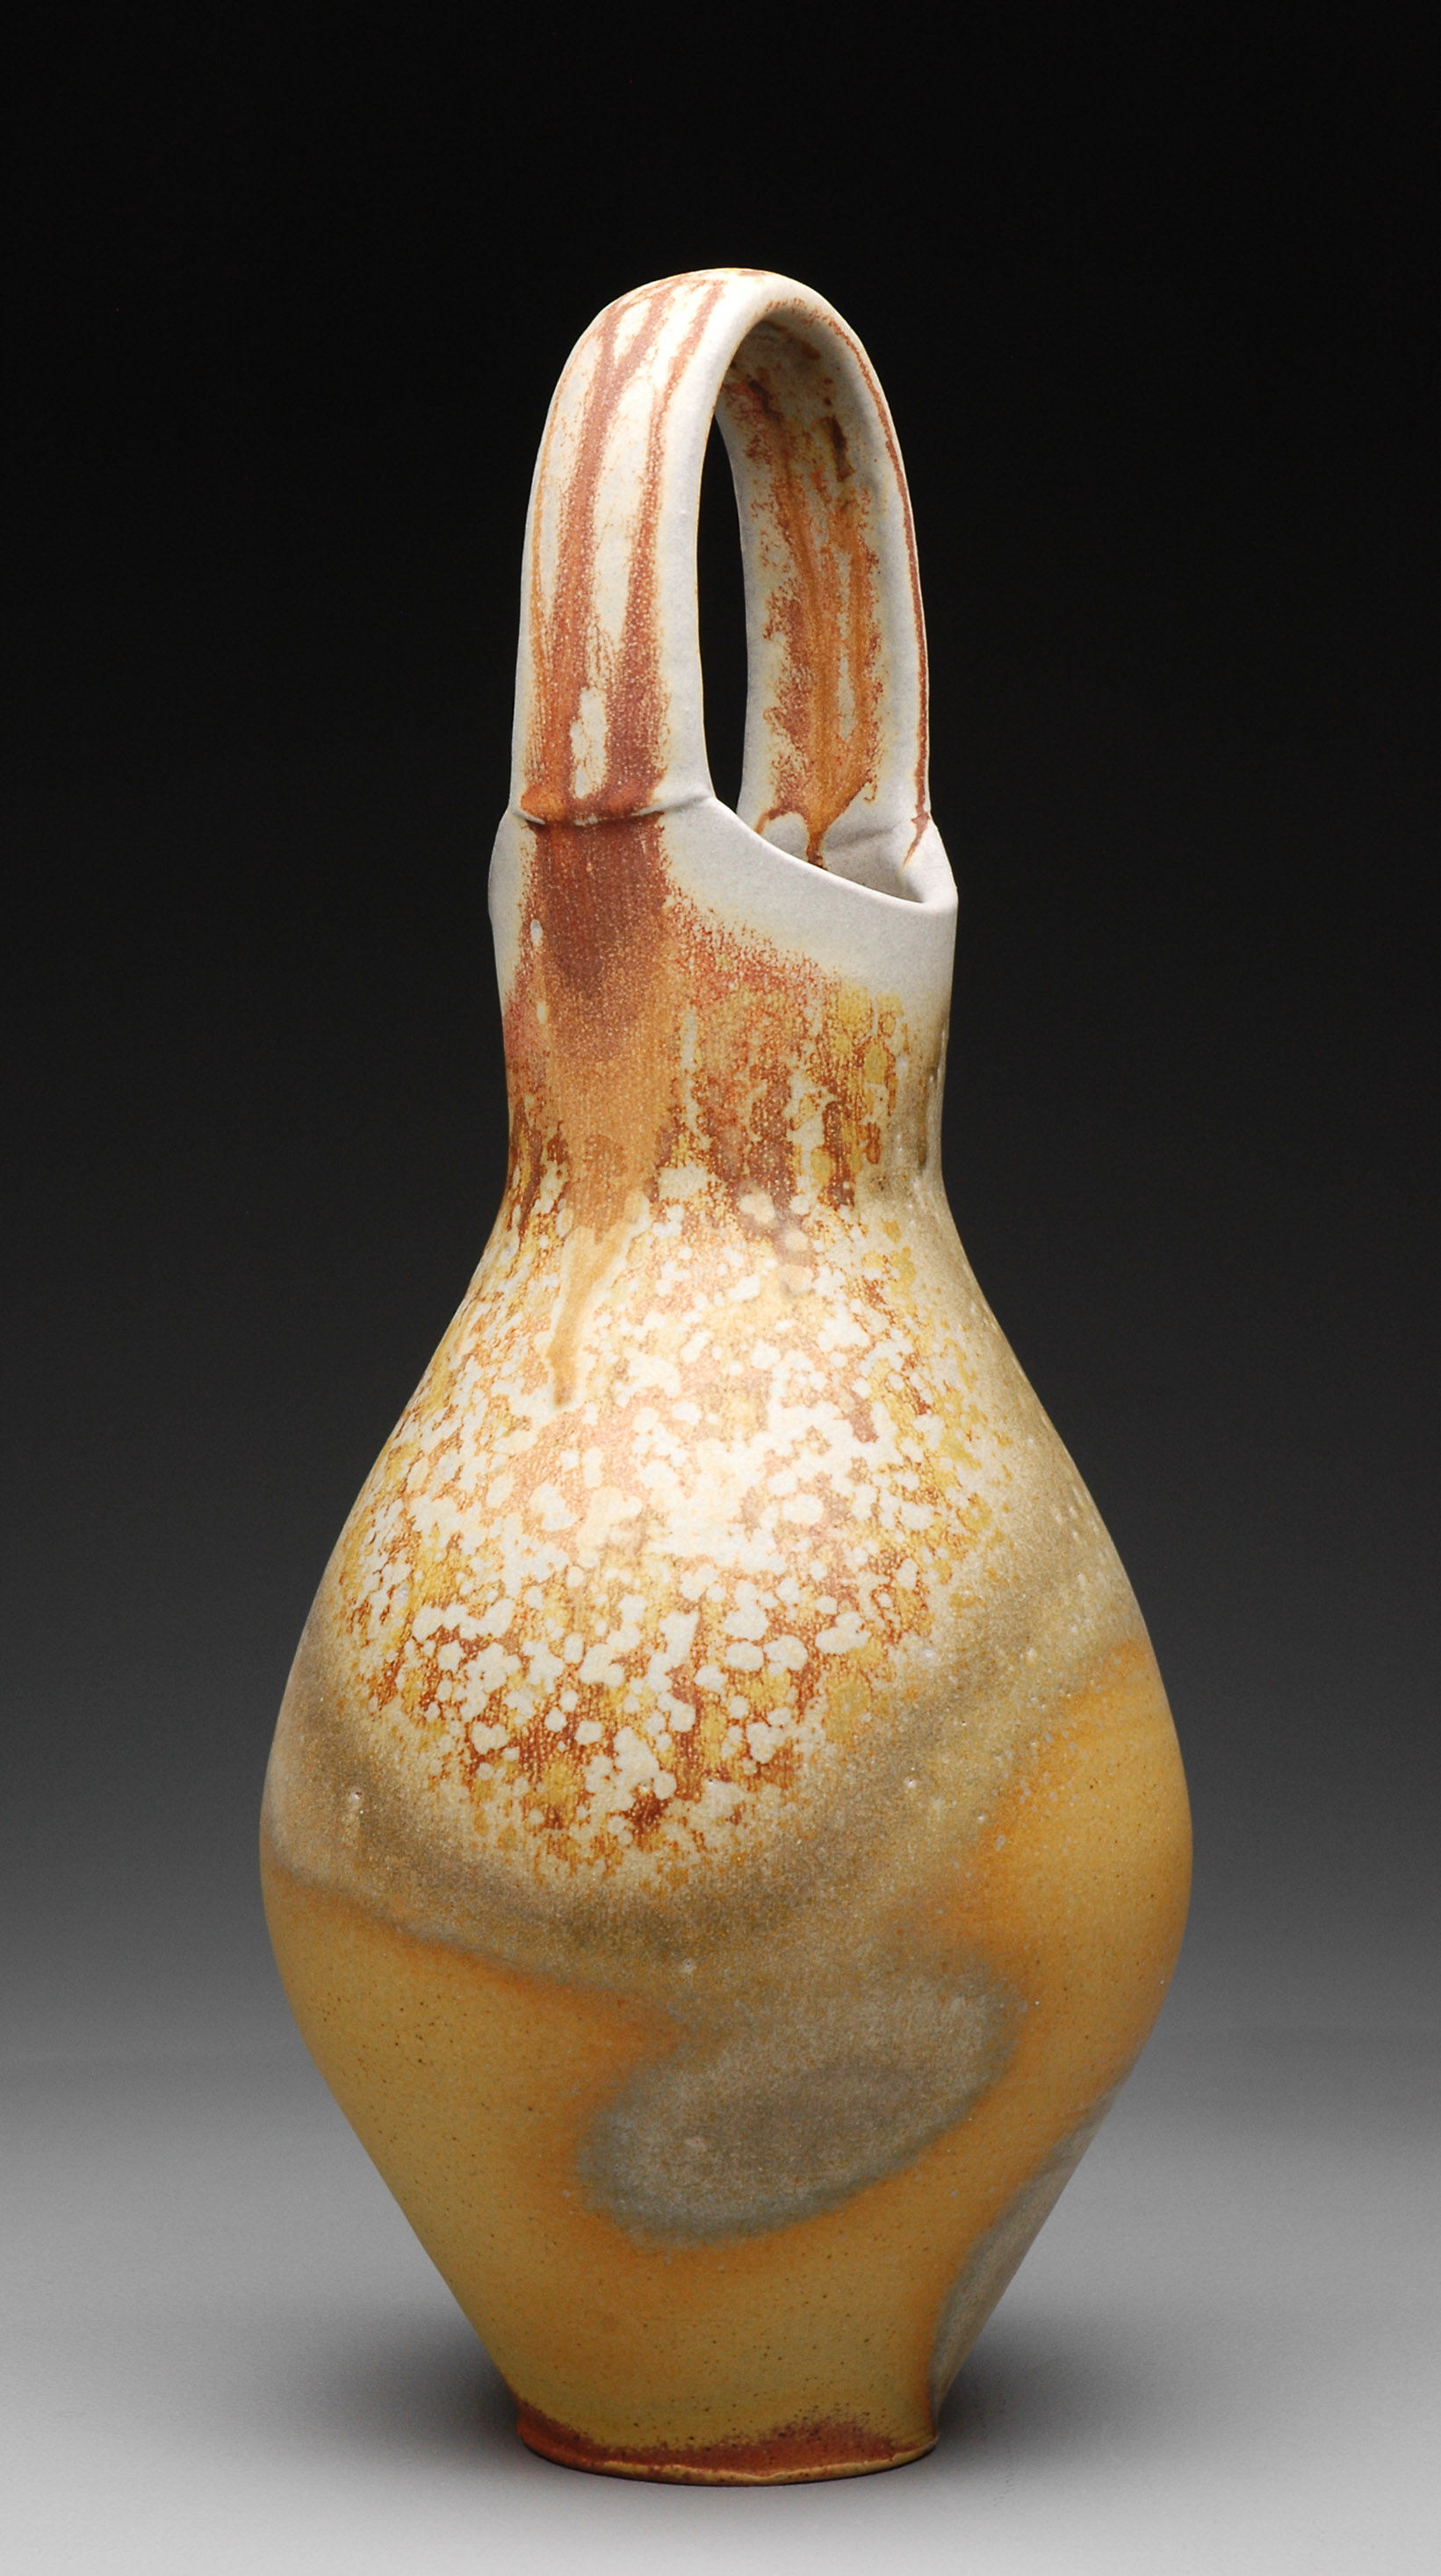    Vase with Handle , soda fired stoneware, 2013  